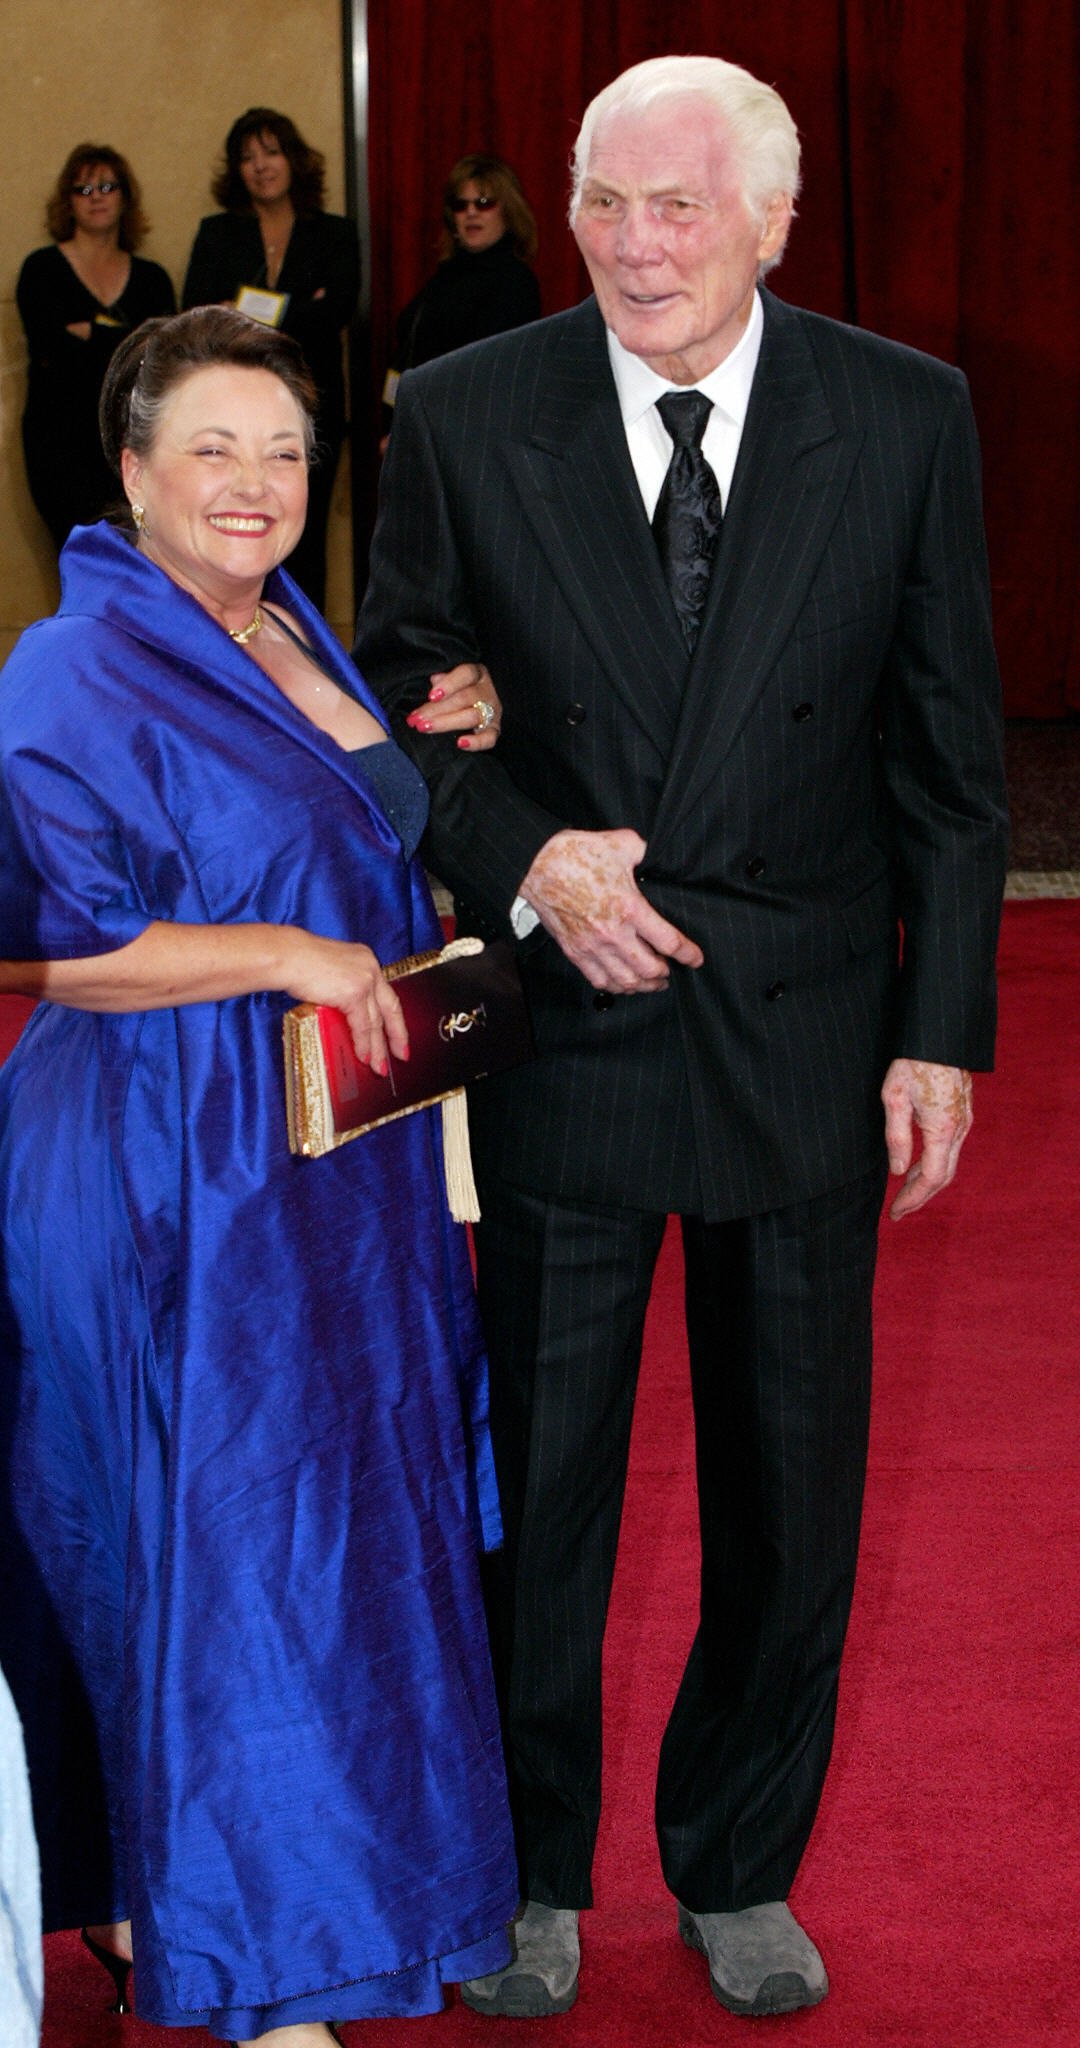 Jack Palance arrives with his wife Elaine